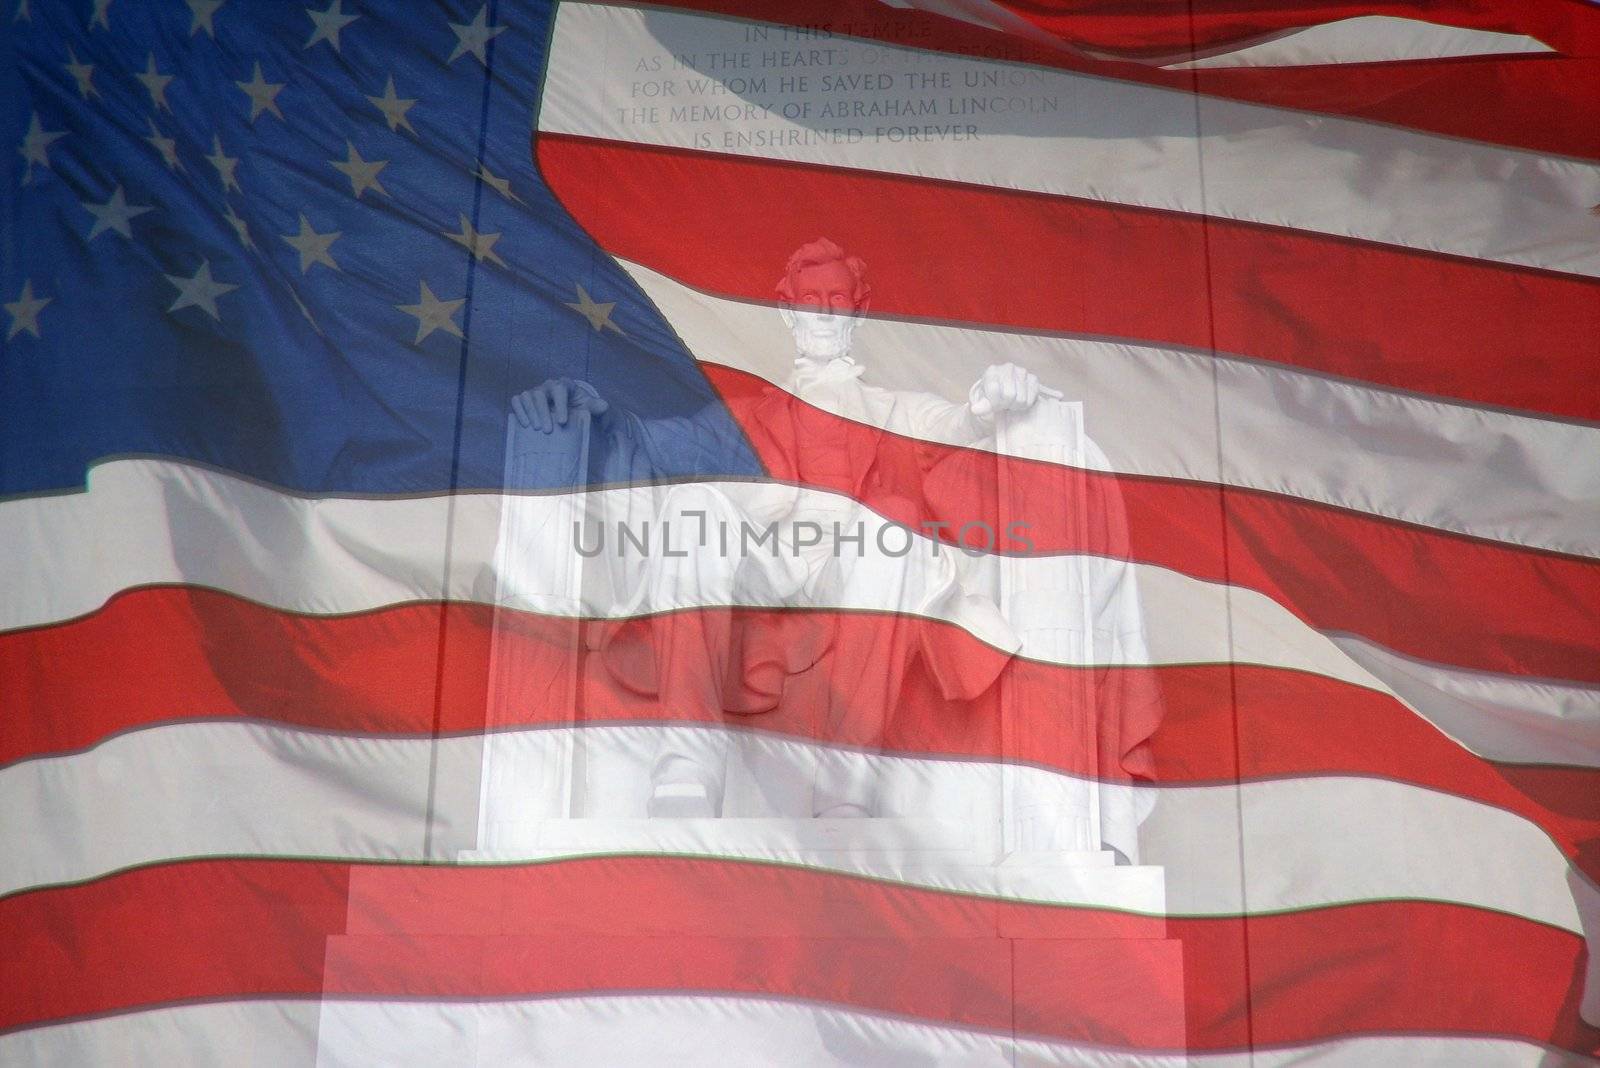 Flag, and Lincoln Monument. Composite of two photos taken by the author.

